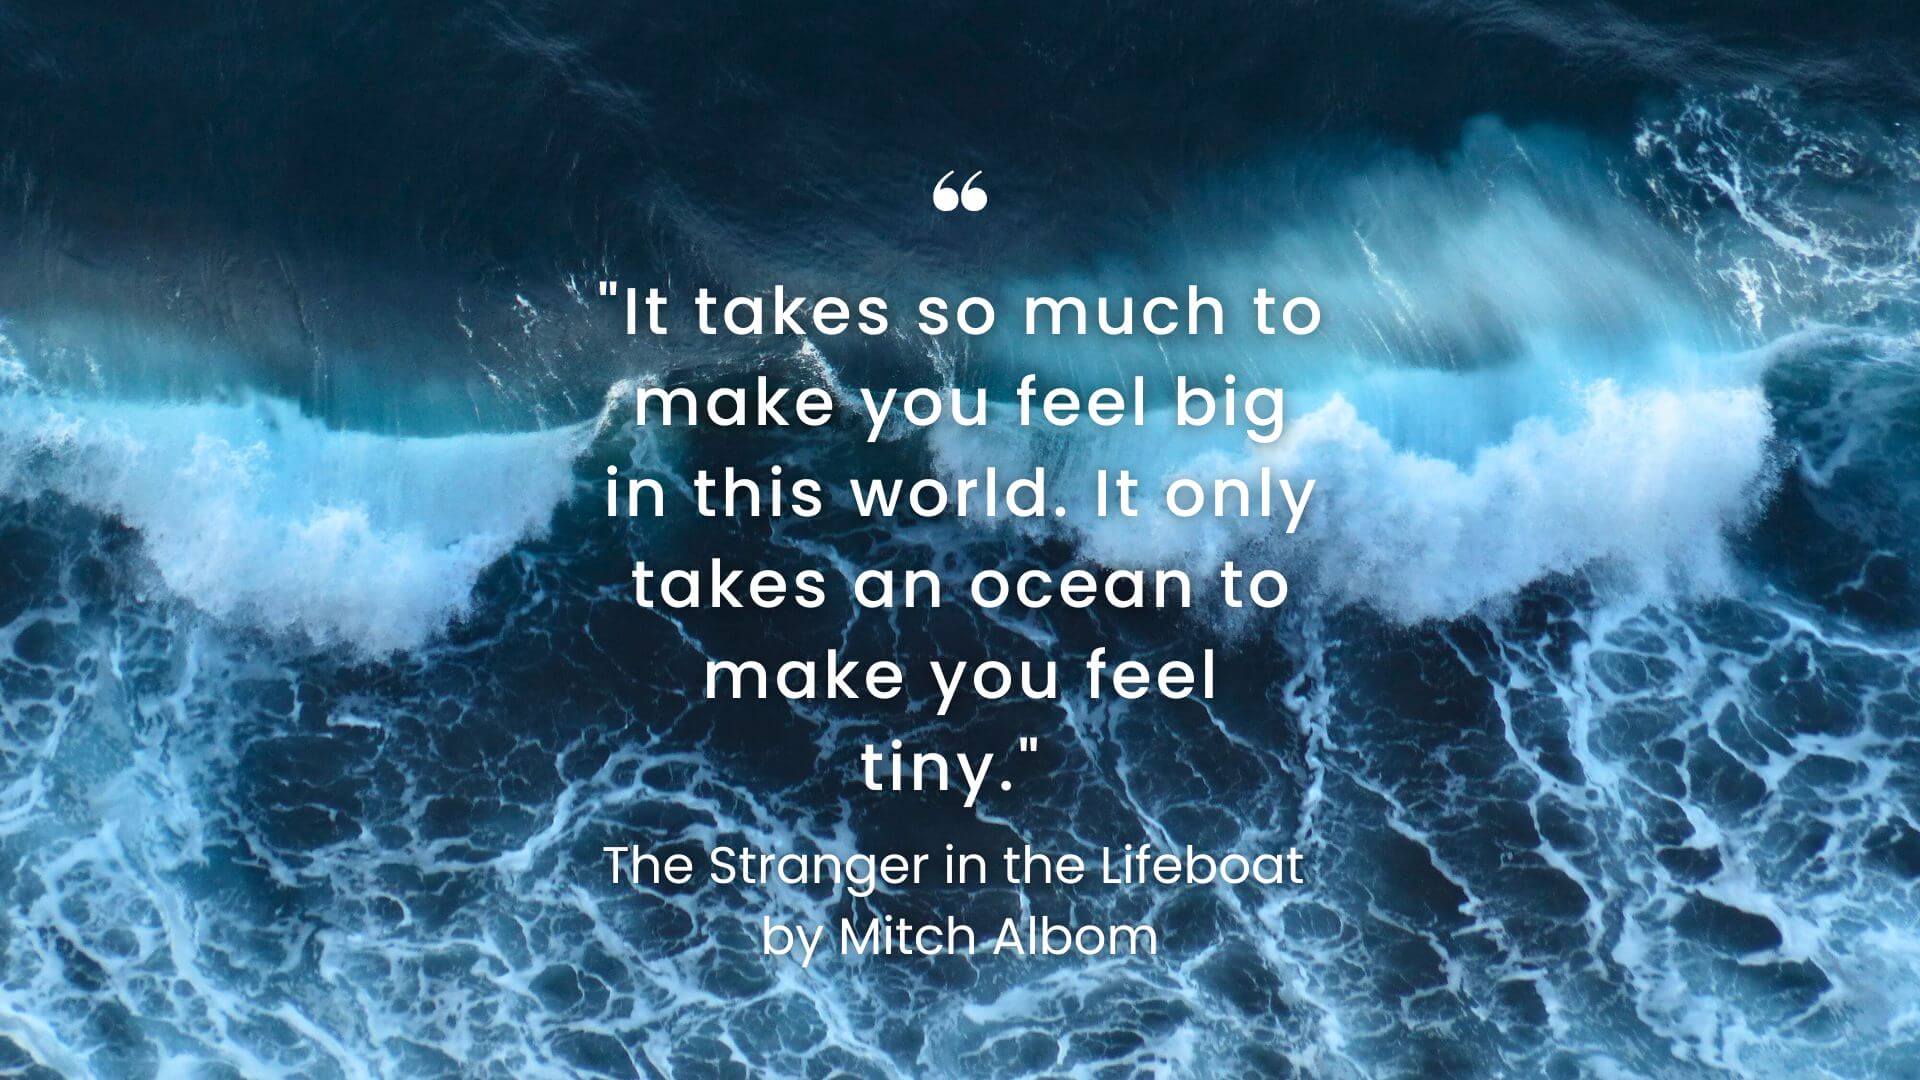 17 memorable the stranger in the lifeboat quotes by mitch albom